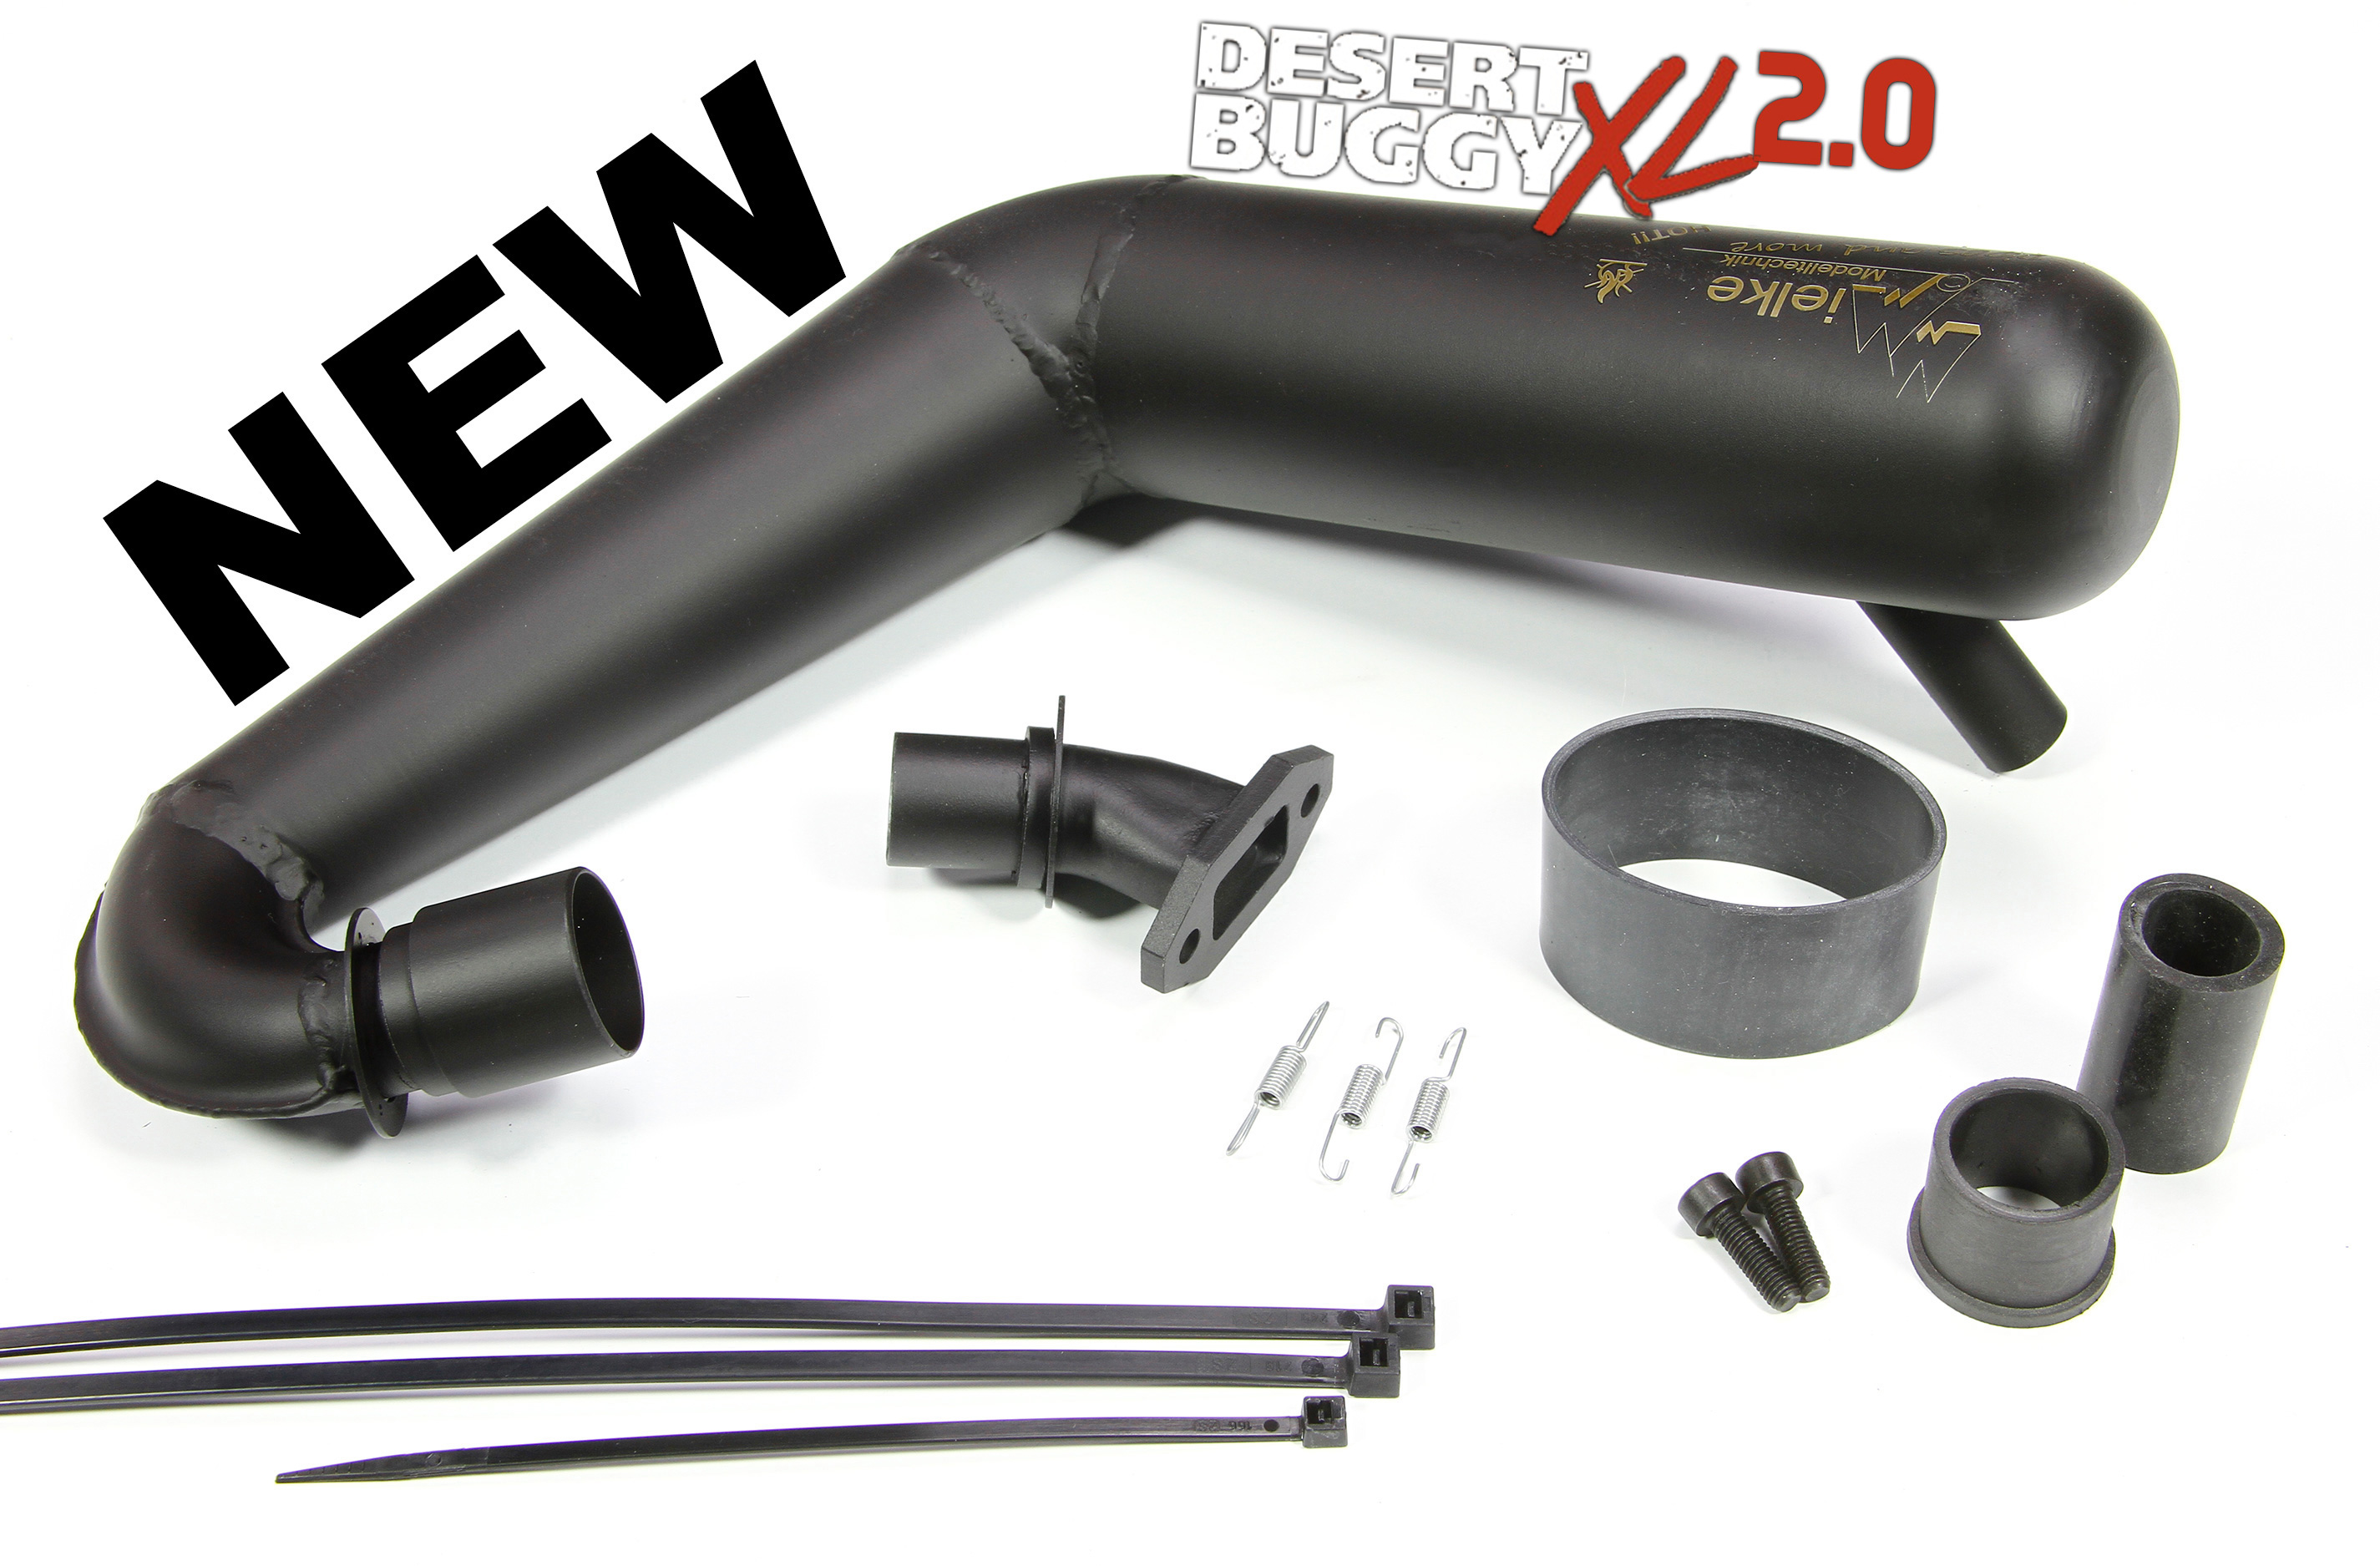 5187/XL2.0 Mielke Losi DBXL 2.0 tuned pipe exhaust system for 26 - 32 cm³